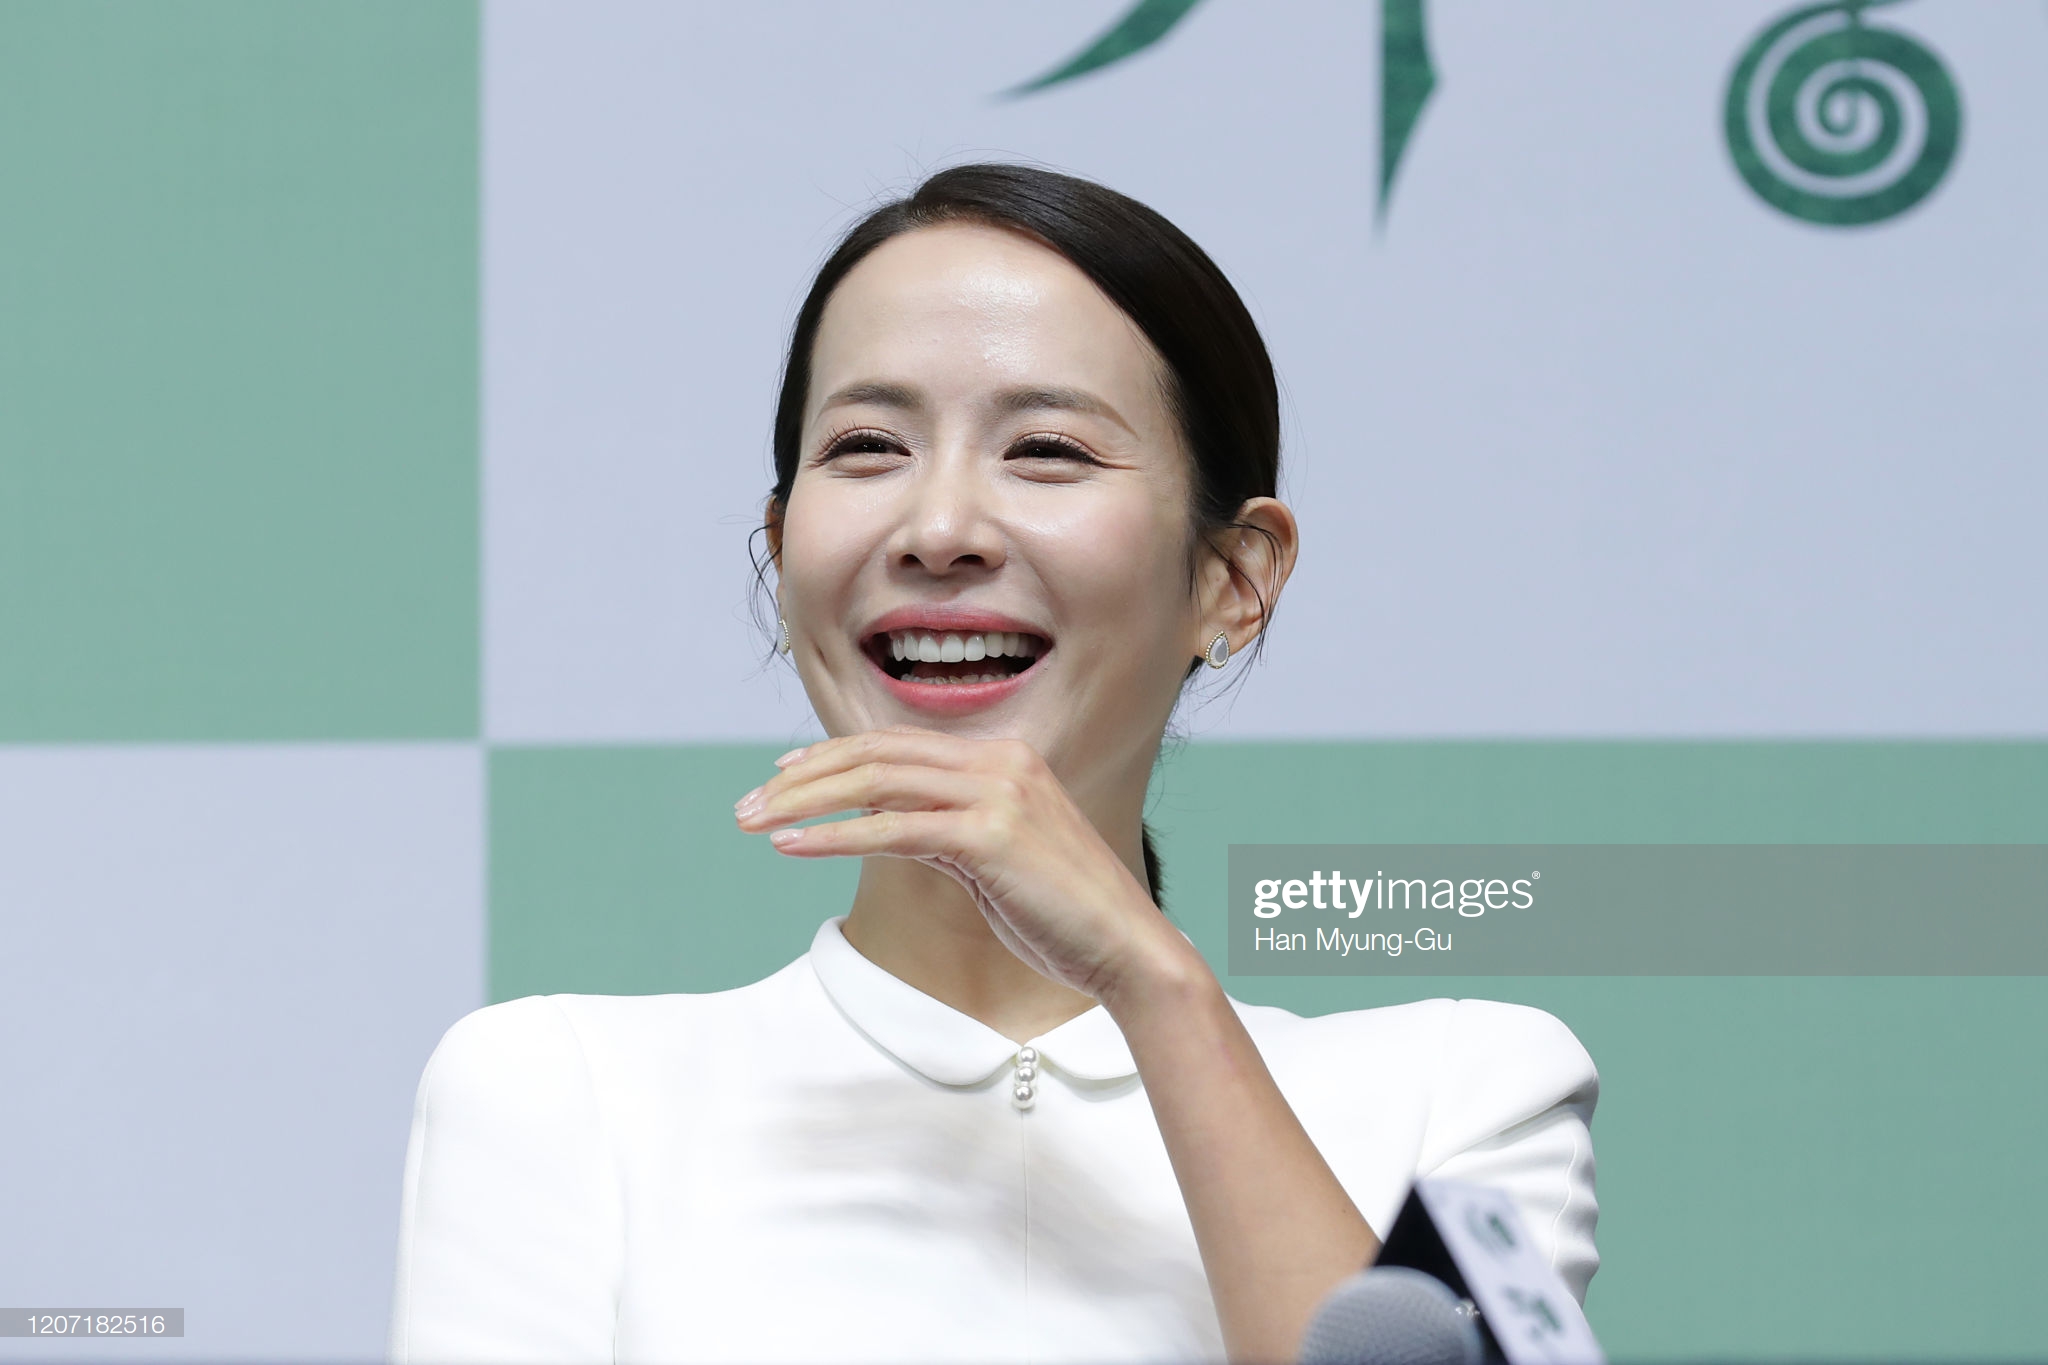 gettyimages-1207182516-2048x2048.jpg